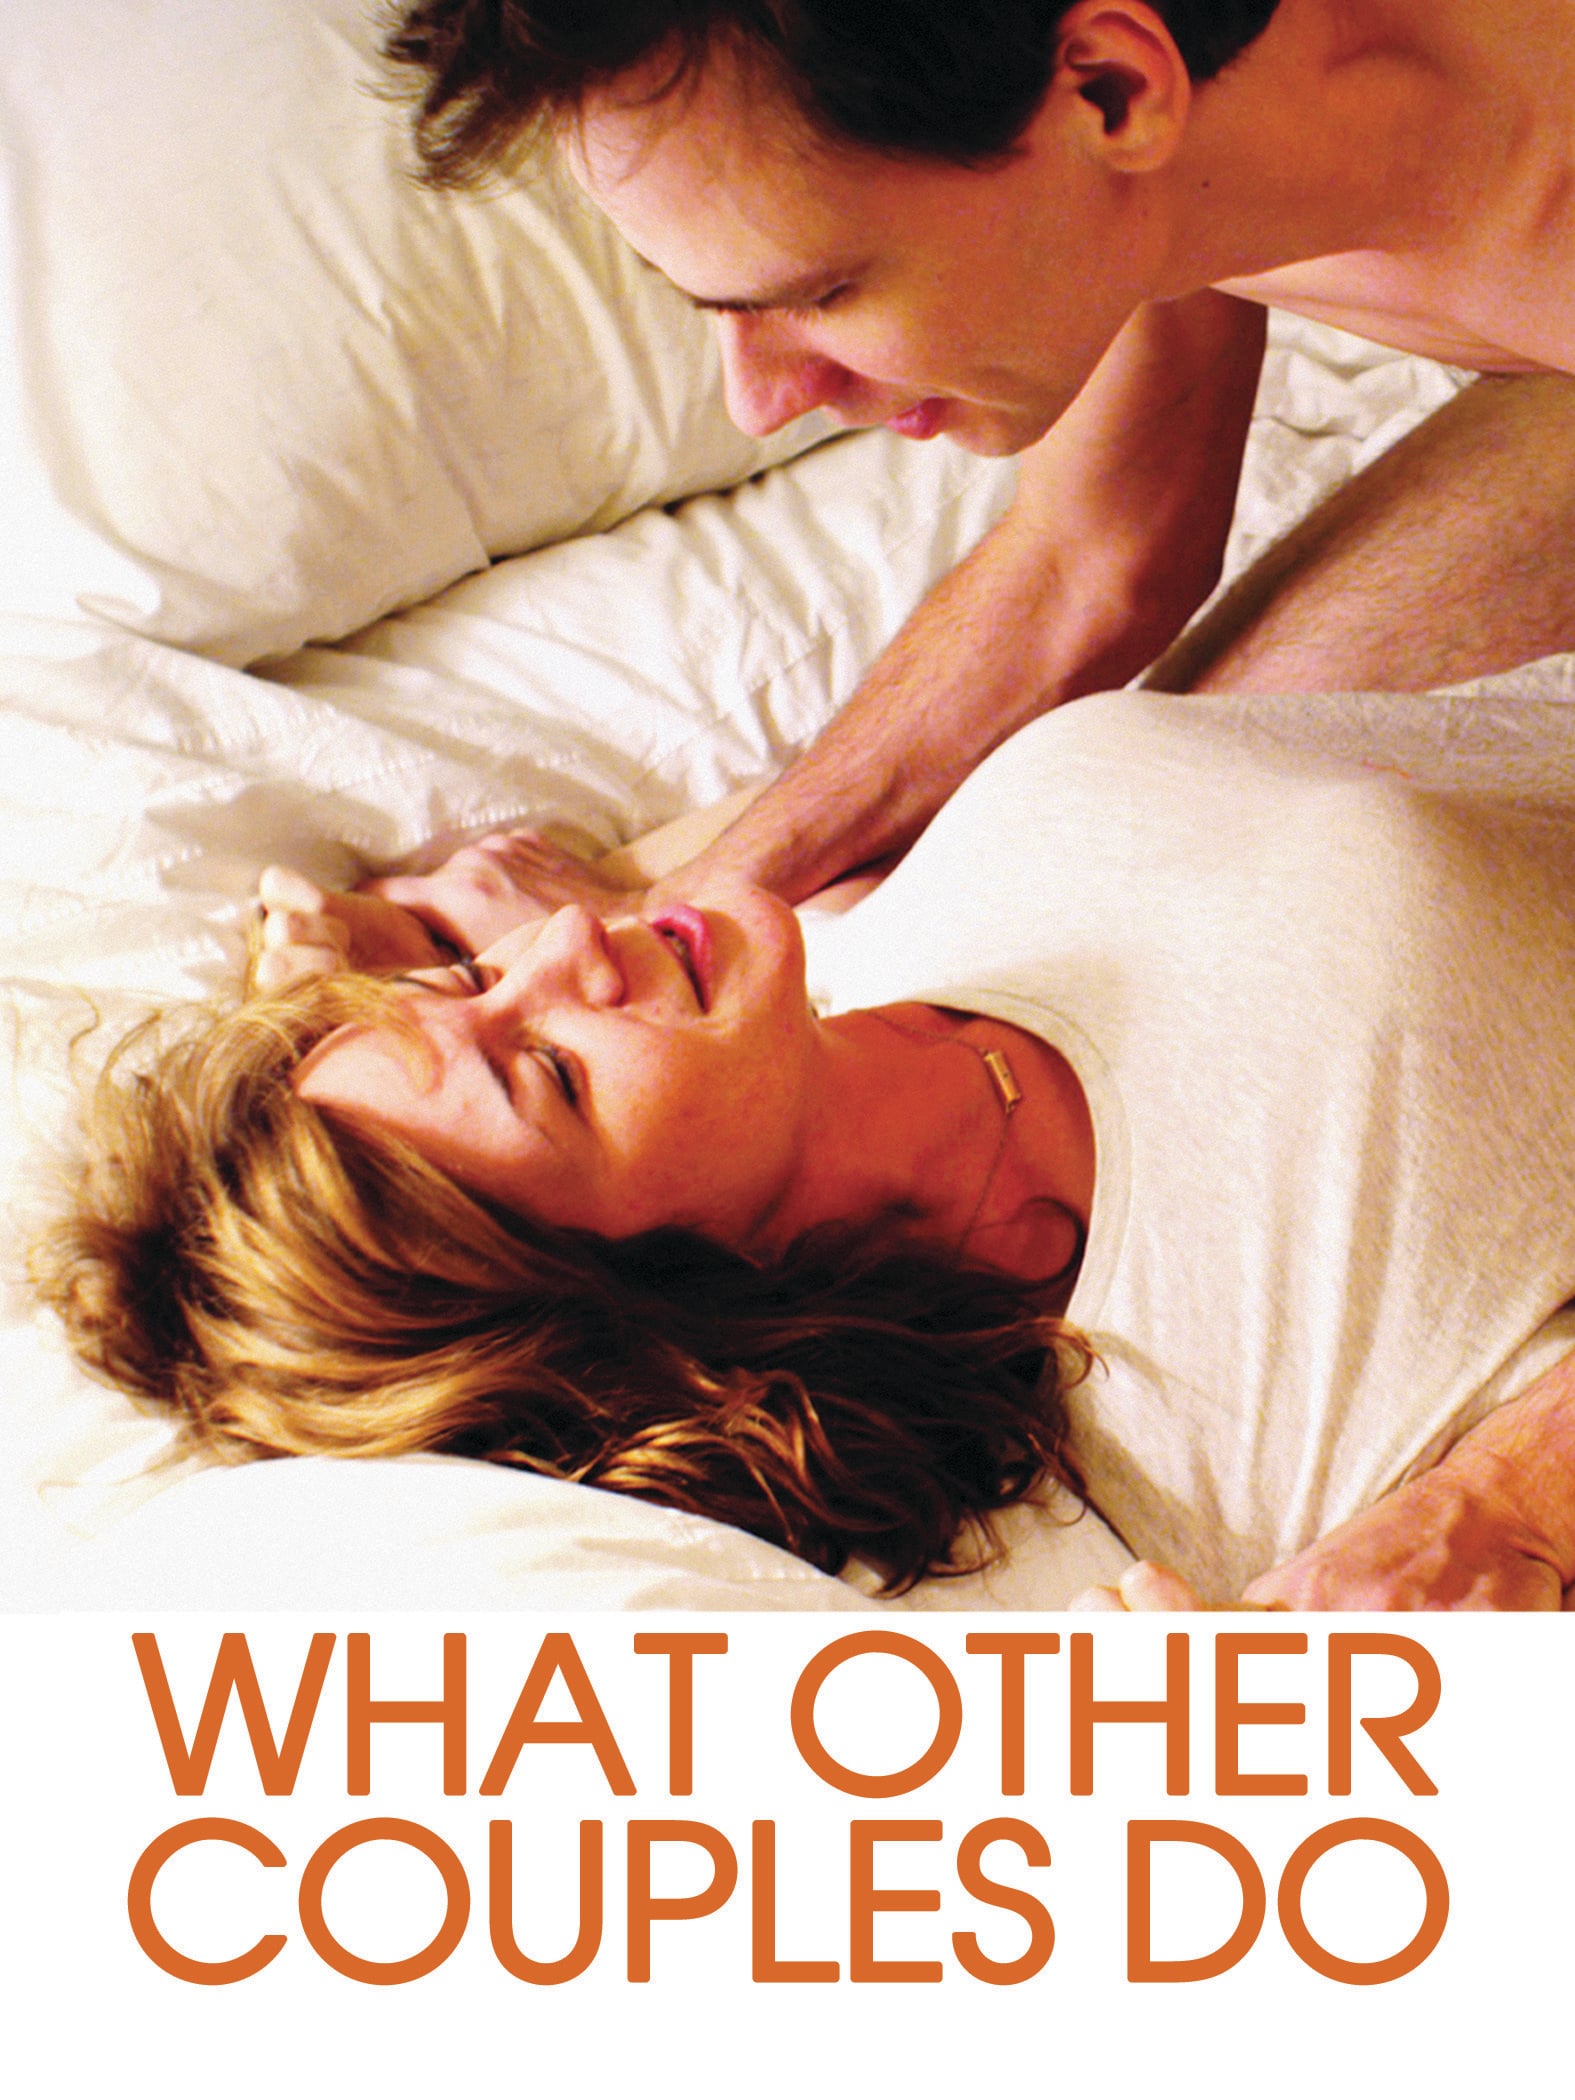 What Other Couples Do (Romantic Comedy Film) — Official Trailer